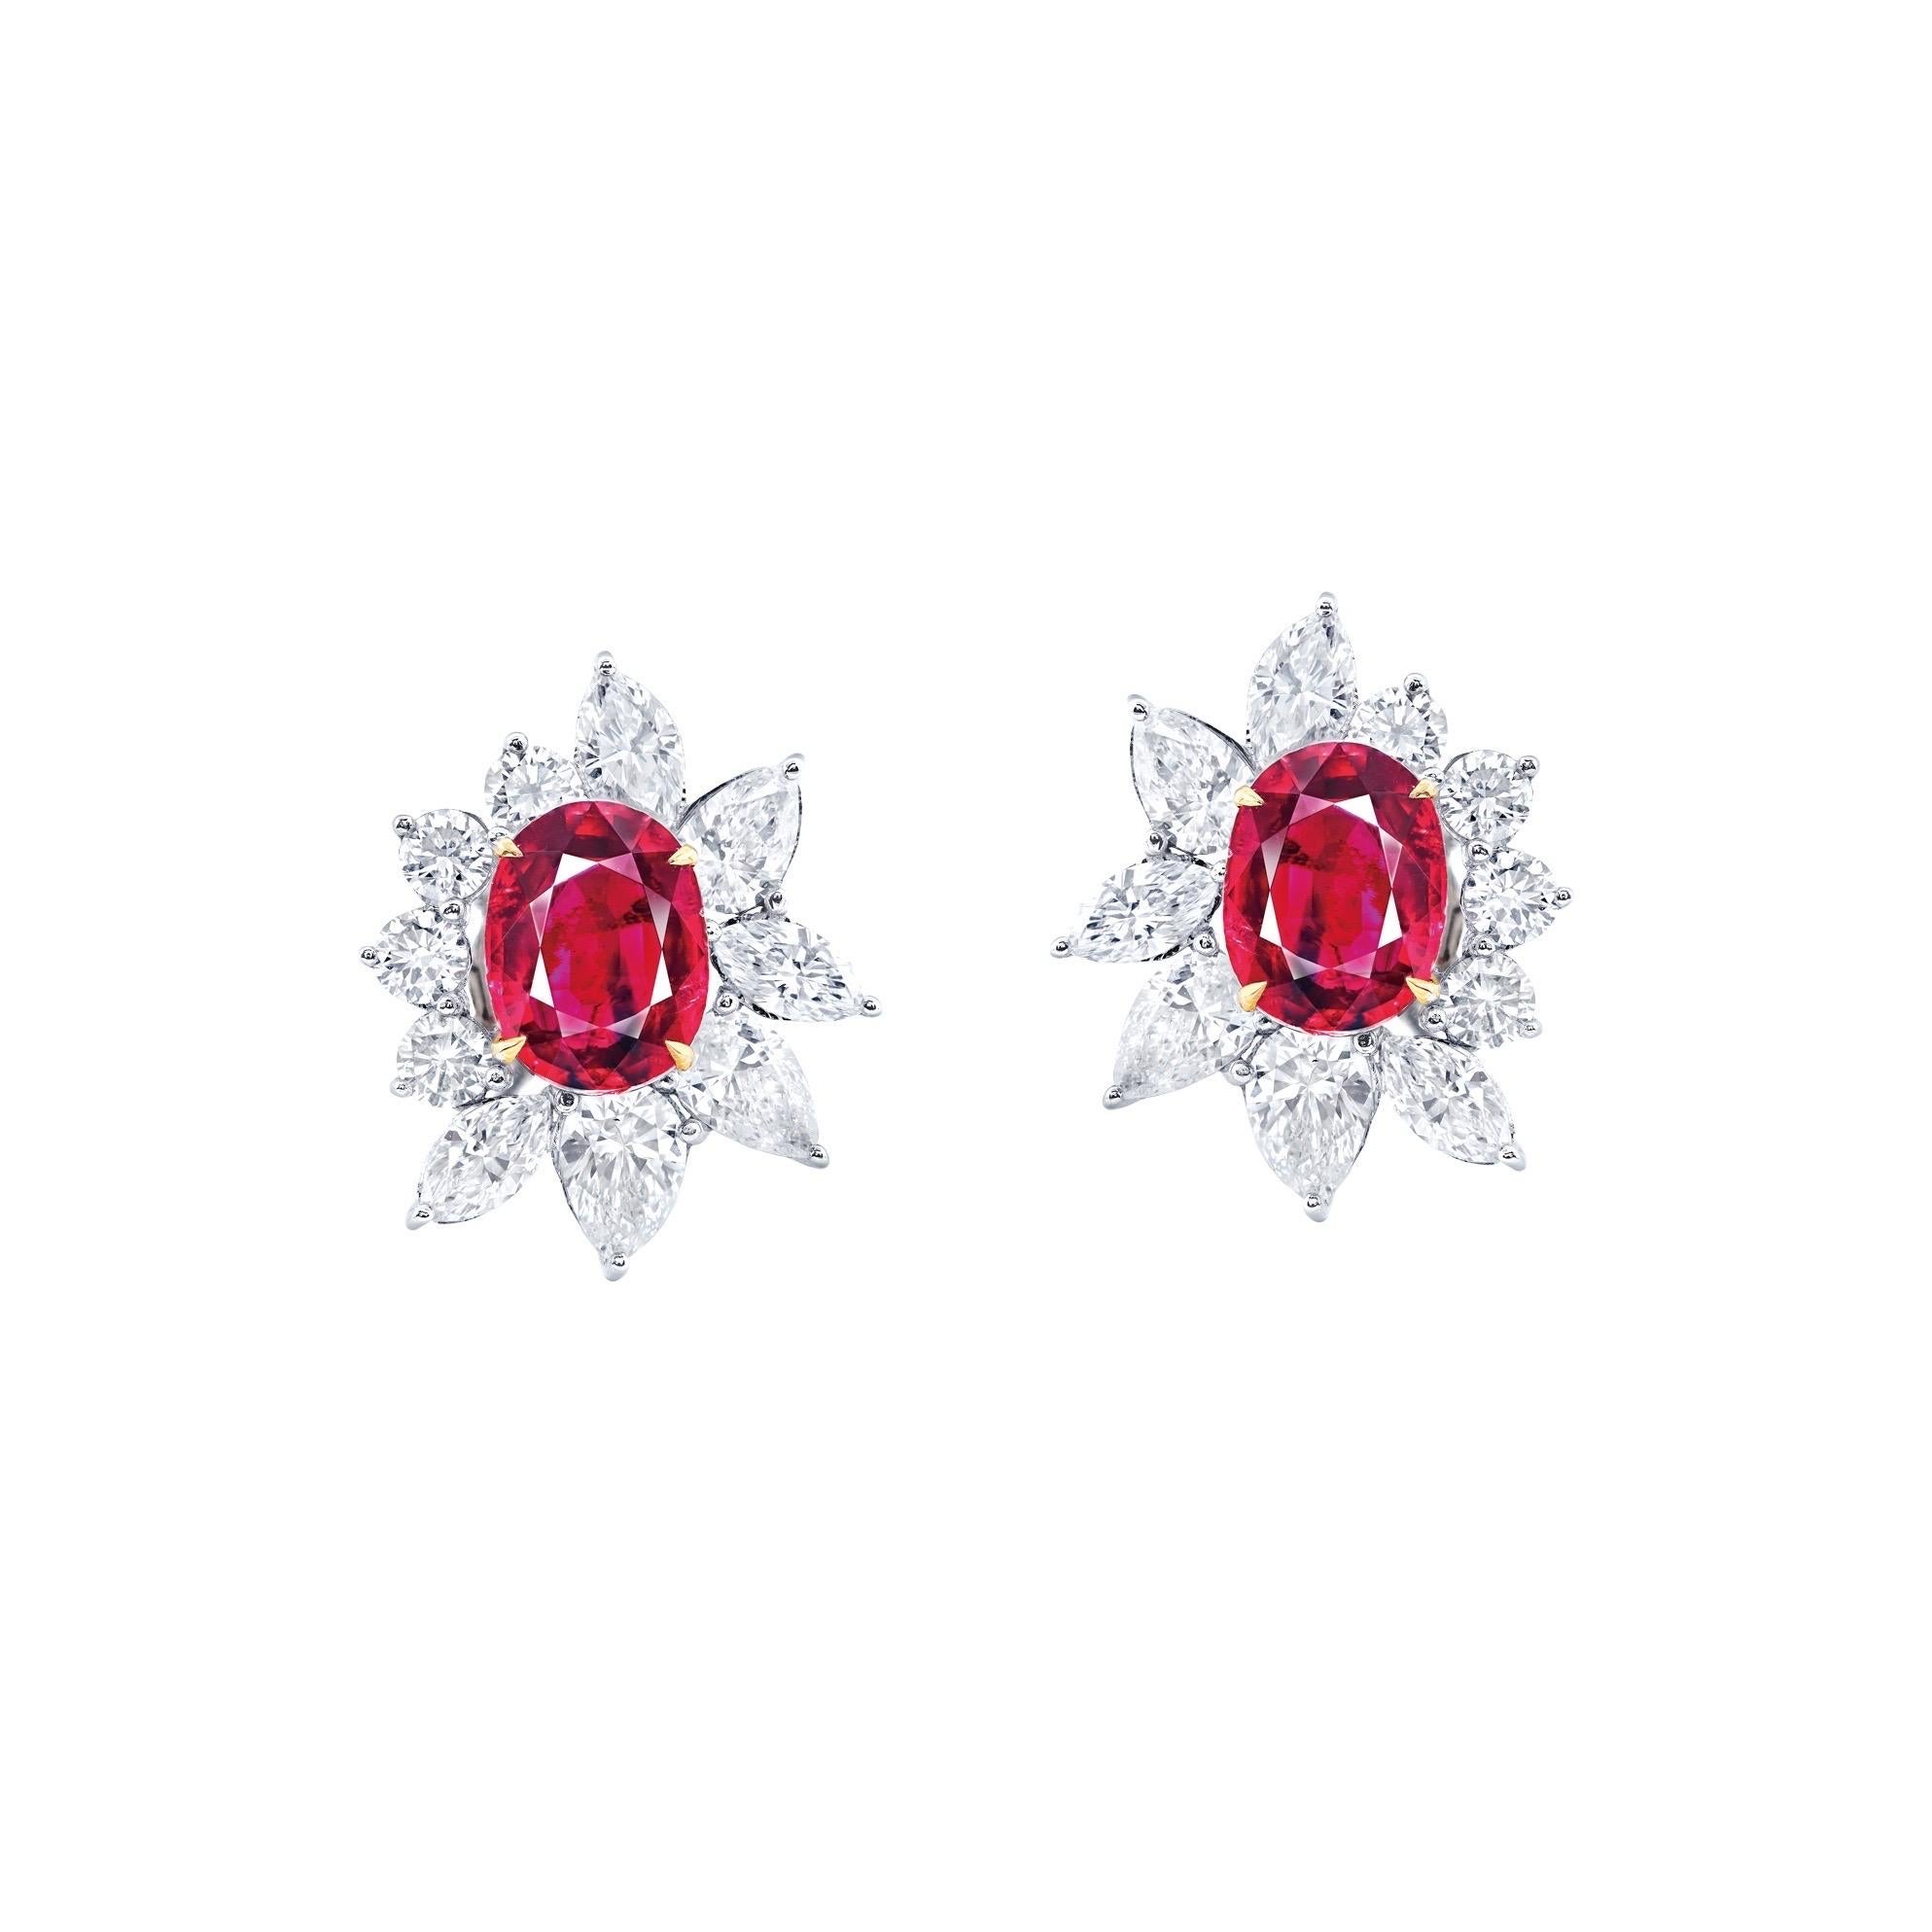 From the Museum Vault at Emilio Jewelry, located on New York's iconic Fifth Avenue,
Main stones: 1.40 carat Vivid Red (PIGEON BLOOD) OVAL, 1.36 carat Vivid Red (PIGEON BLOOD) OVAL
Matching: 8 white diamonds totaling approximately 0.44 carats, 6